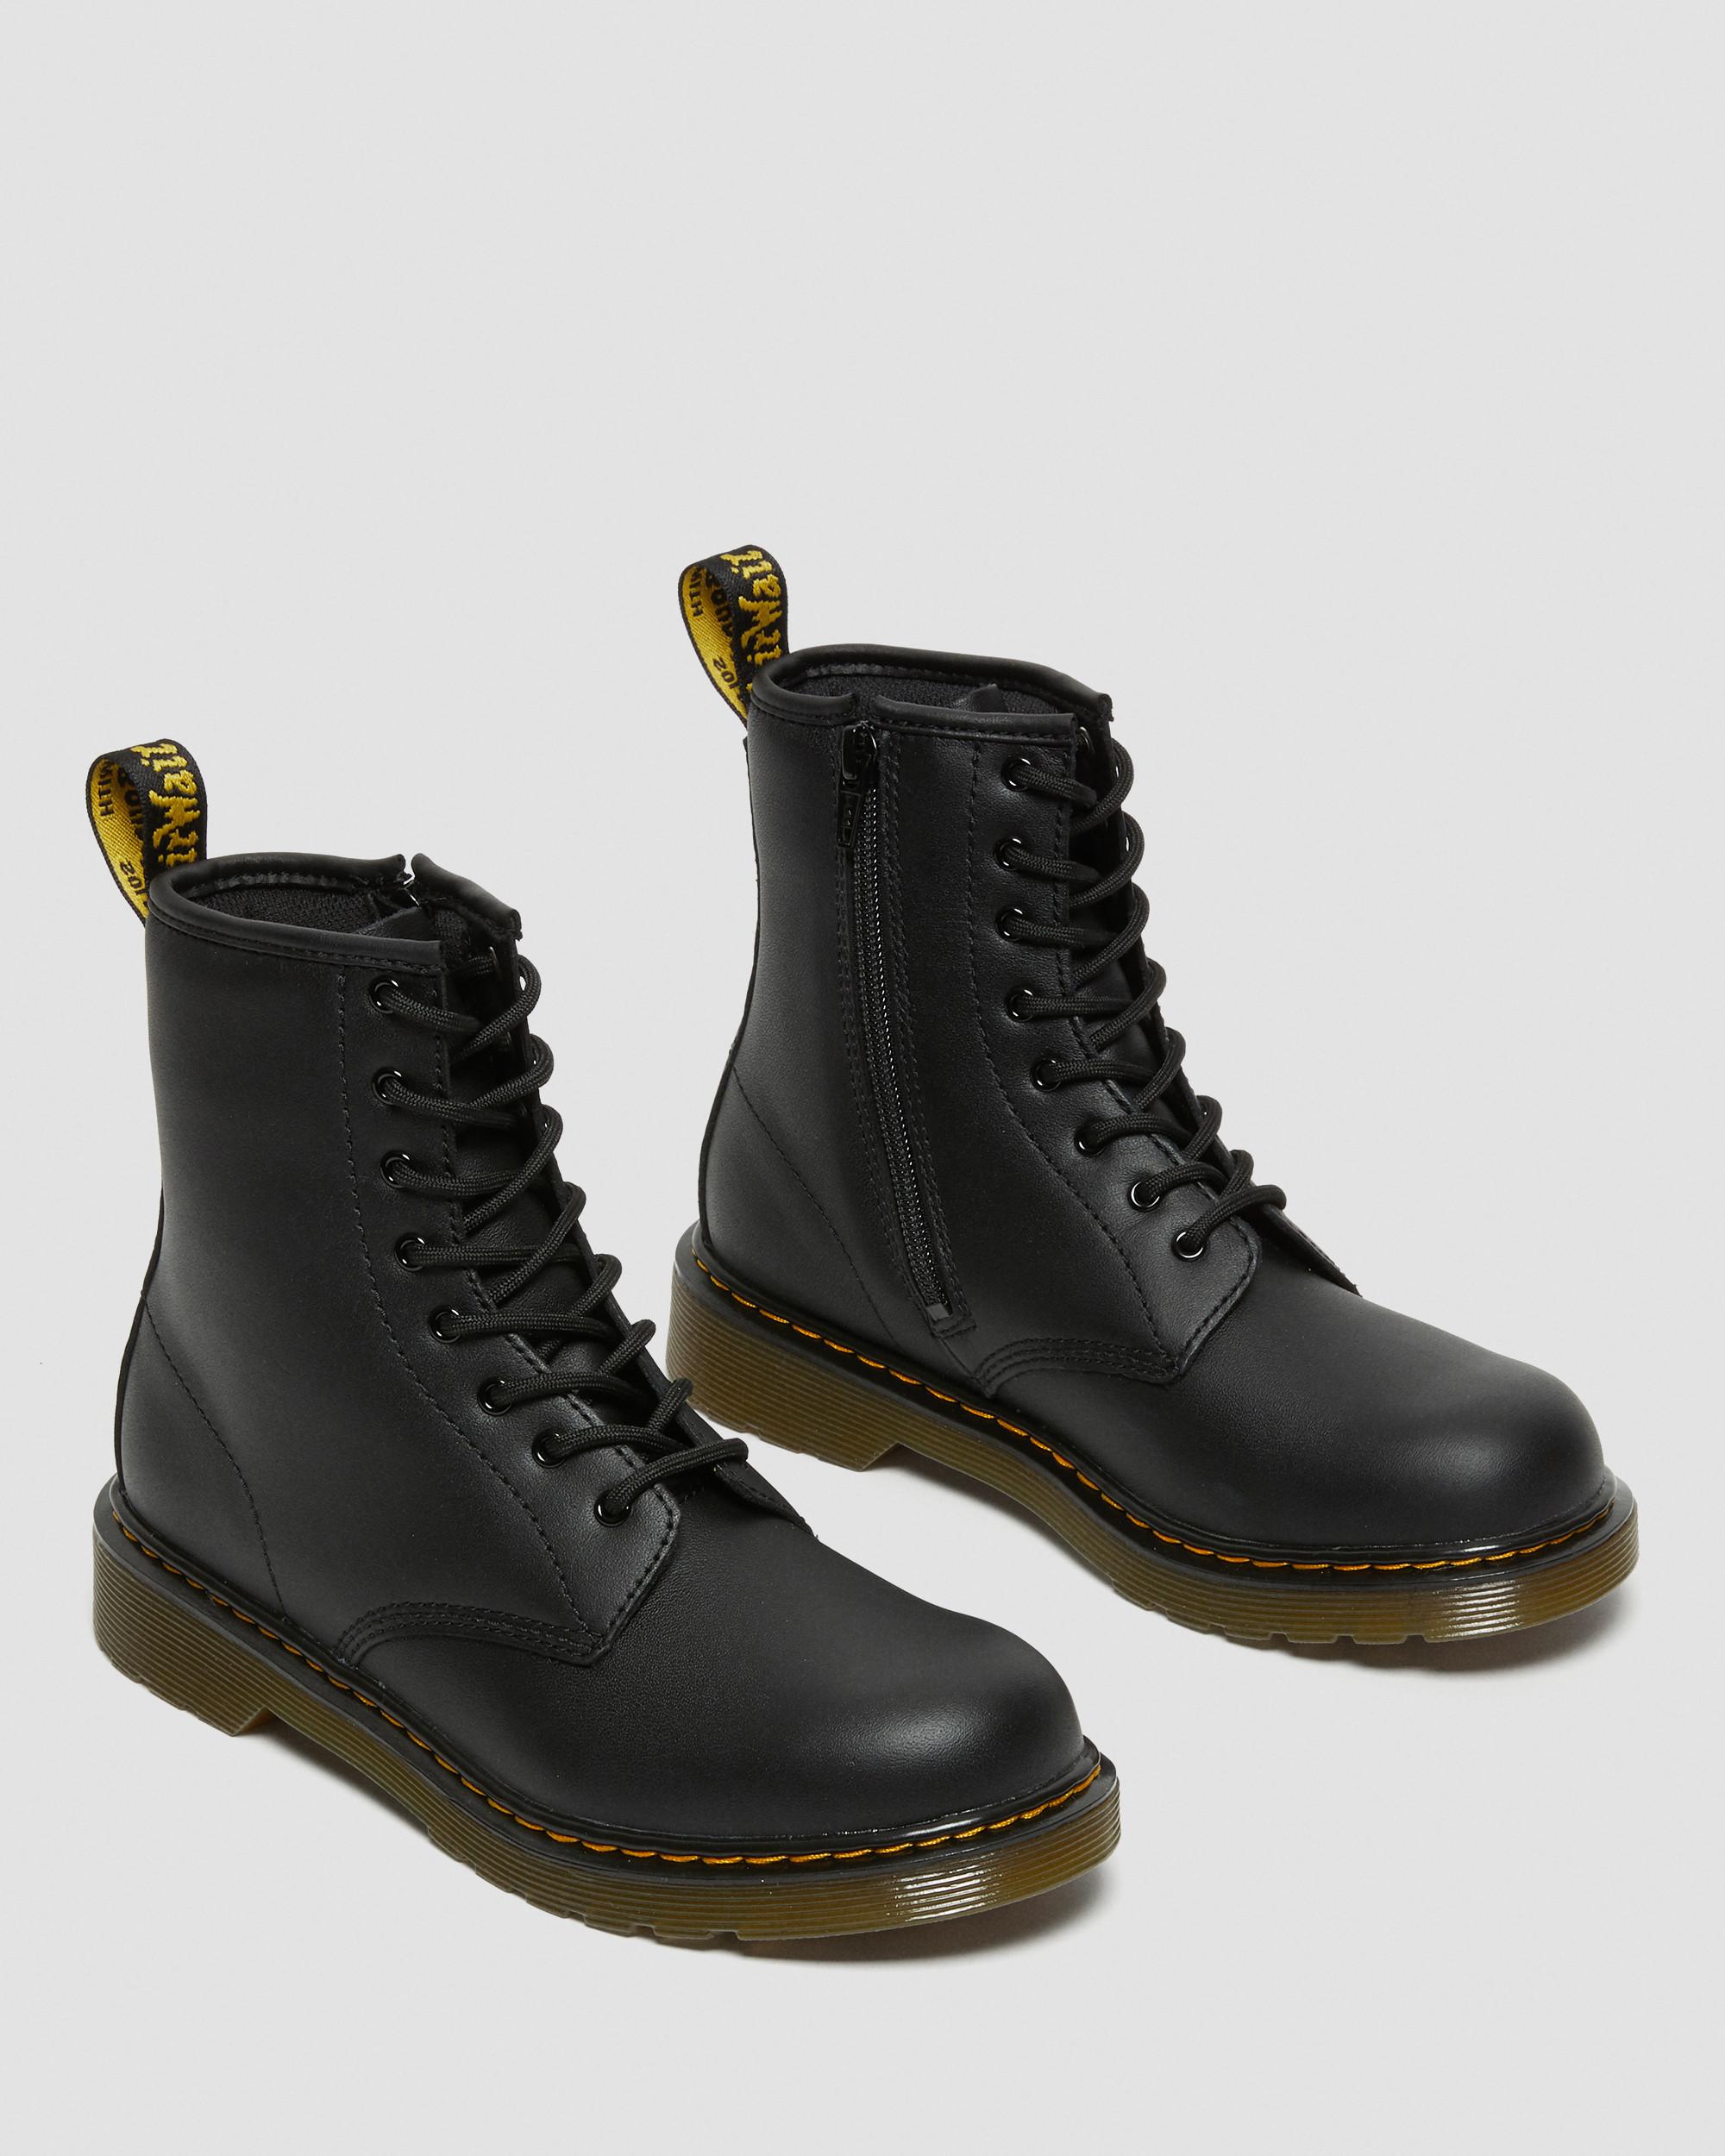 YOUTH 1460 SOFTY T | Dr. Martens